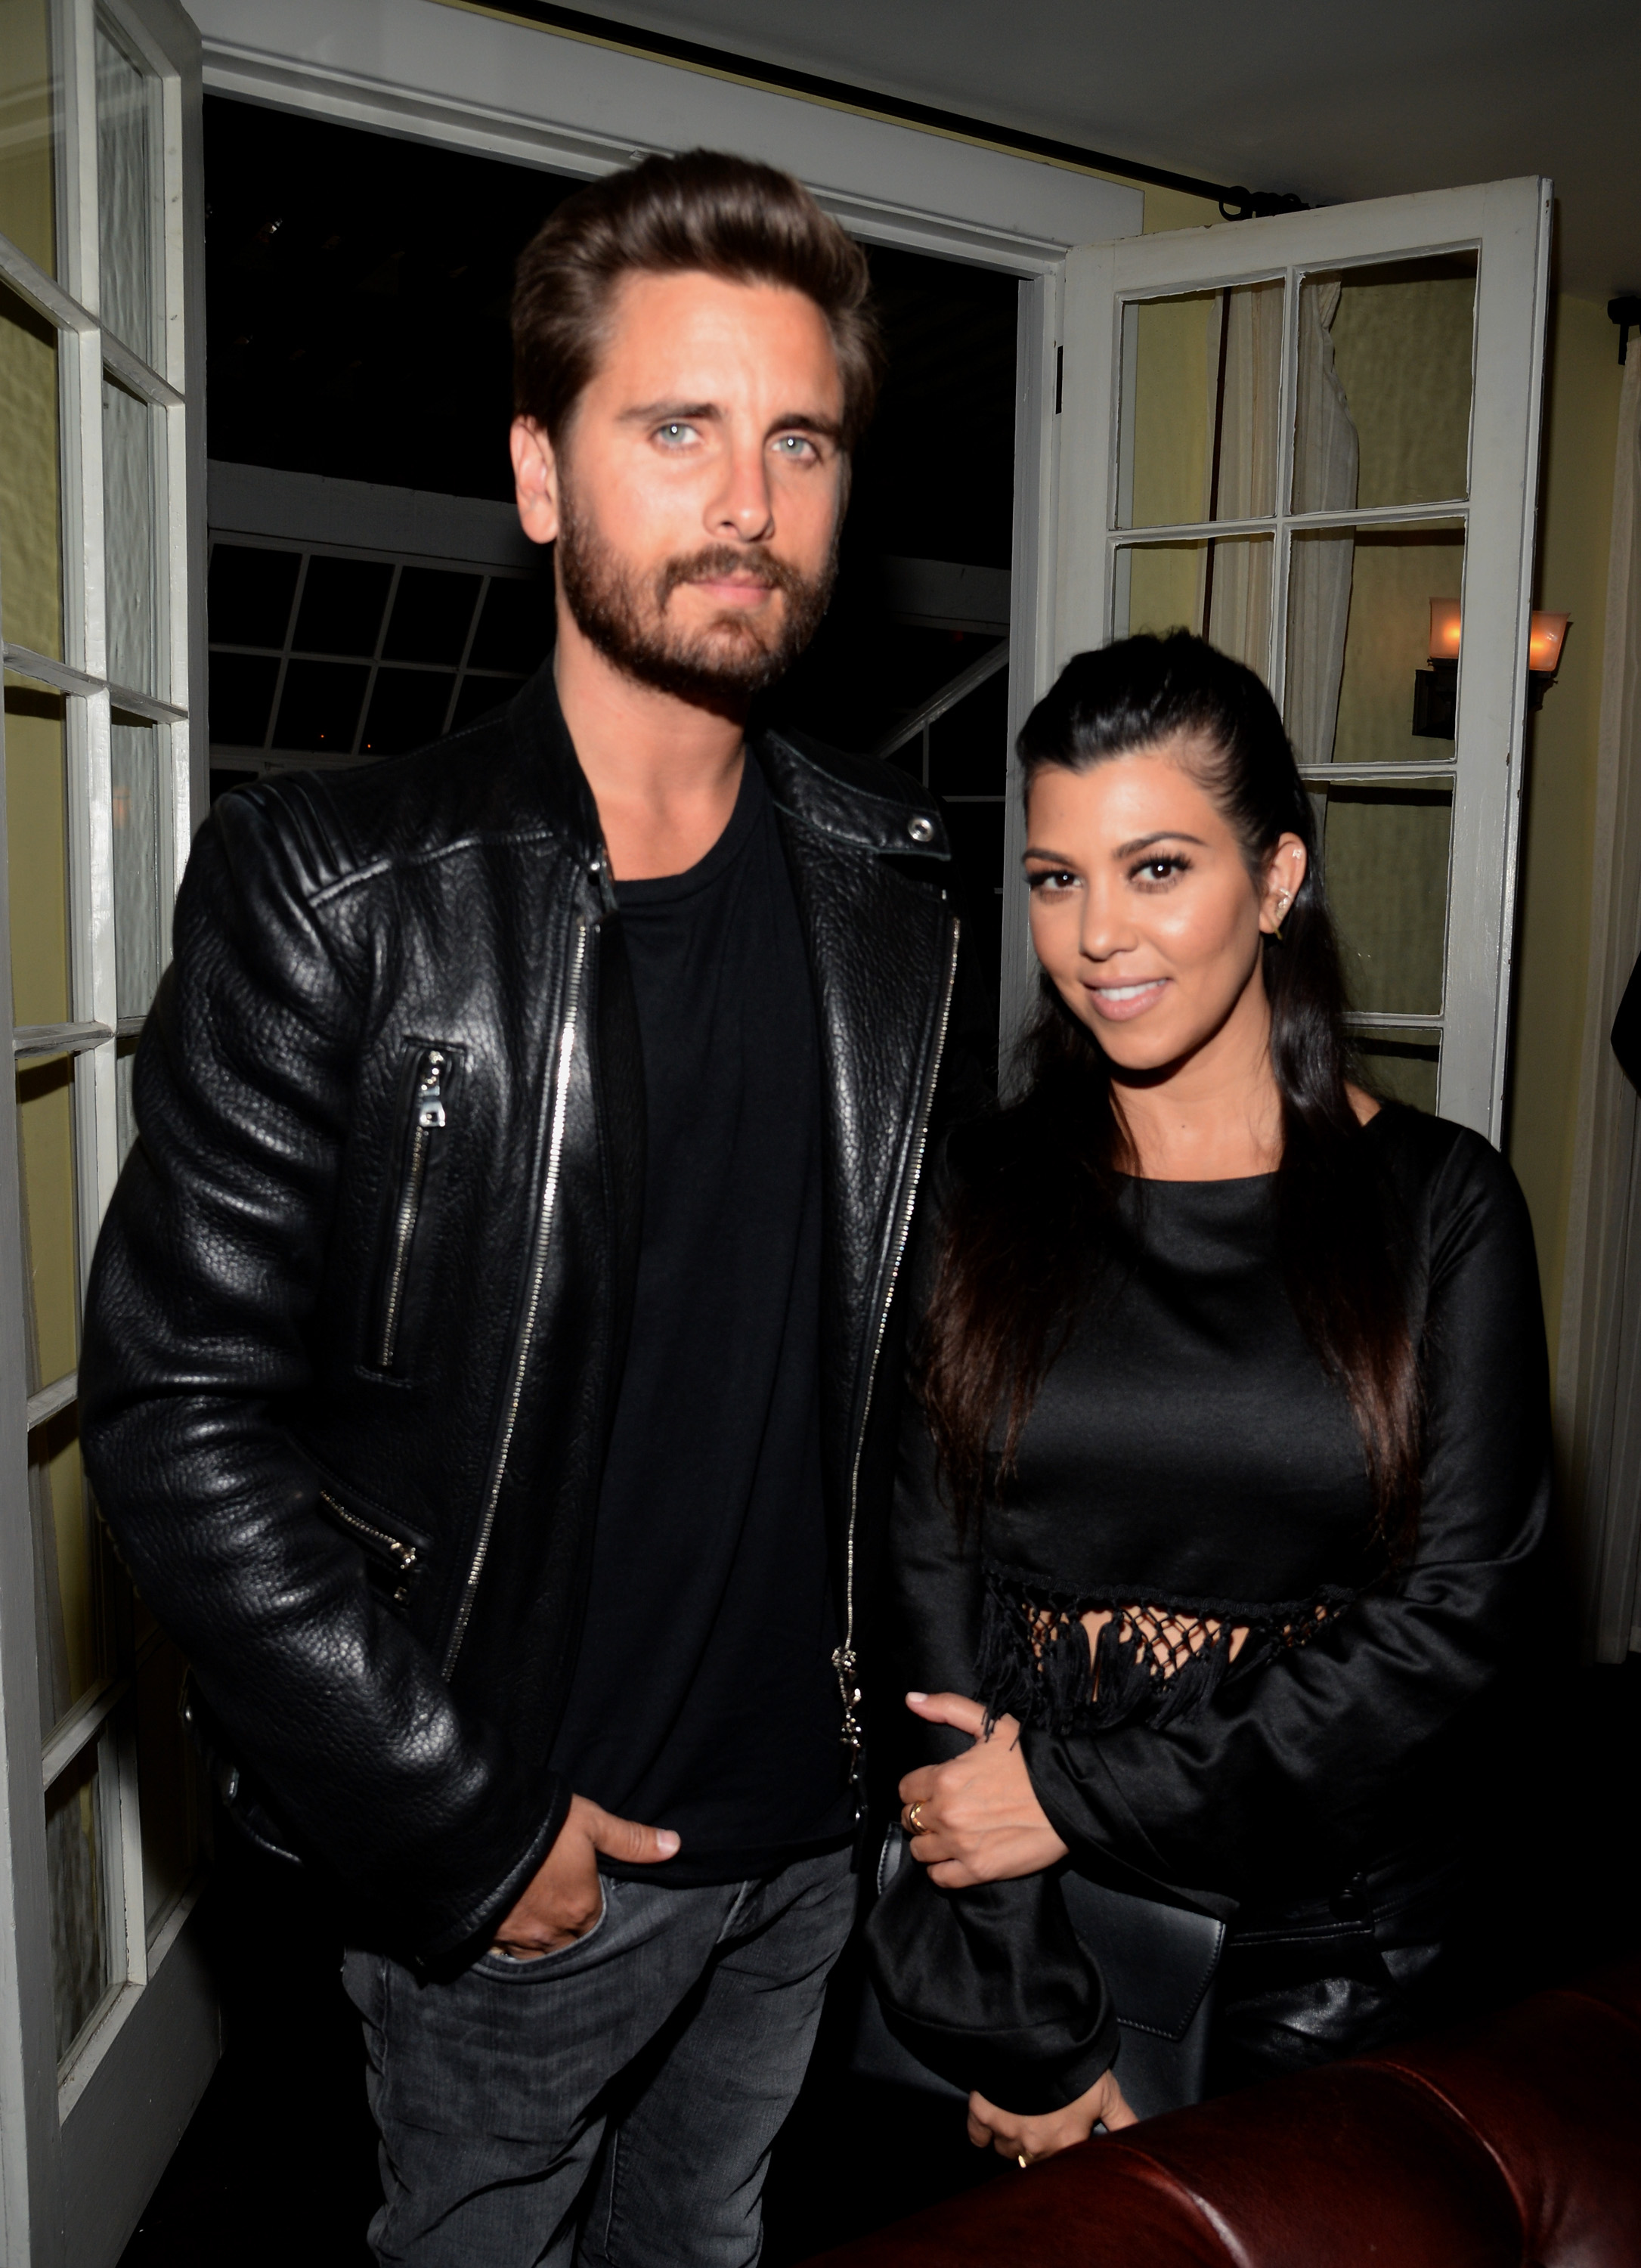 Scott and Kourtney at the launch of Kendall's Calvin Klein campagin